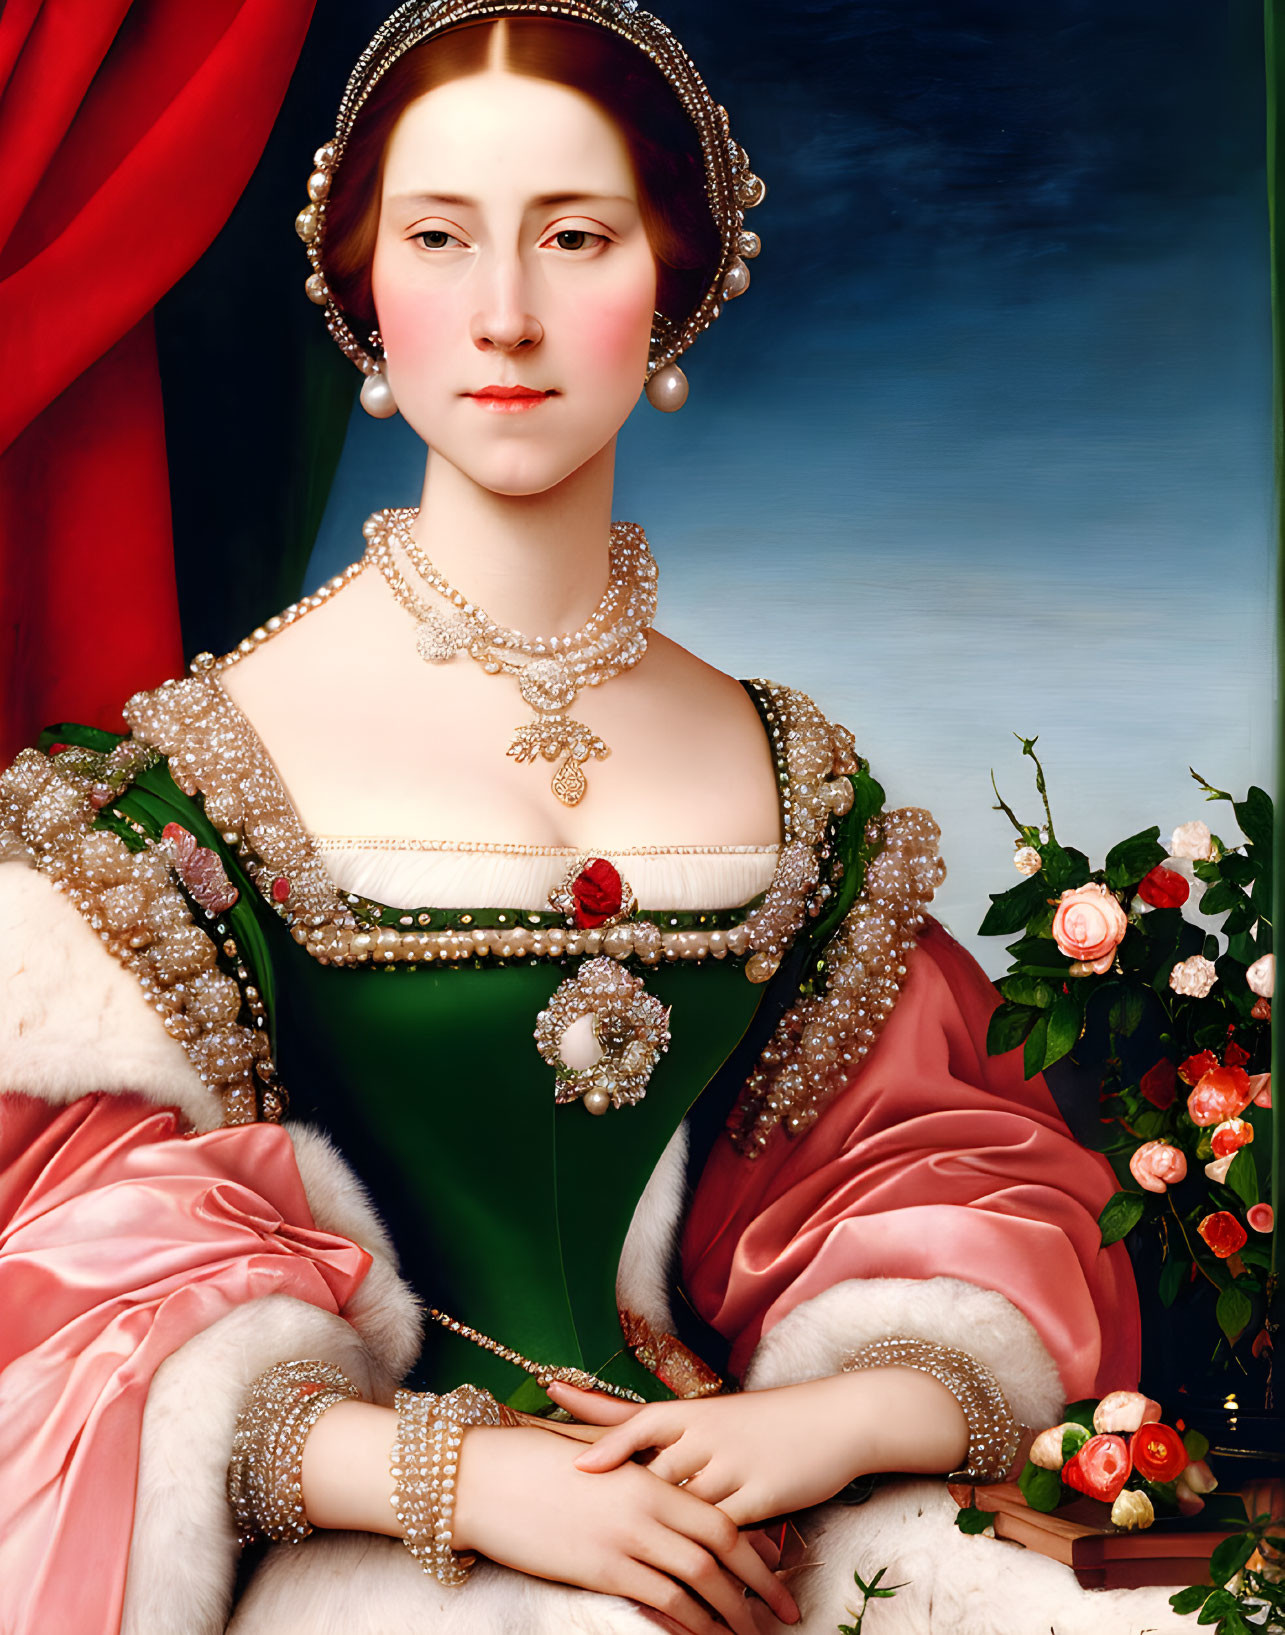 Portrait of woman with auburn hair in green dress with pink sleeves and pearls, beside vase of